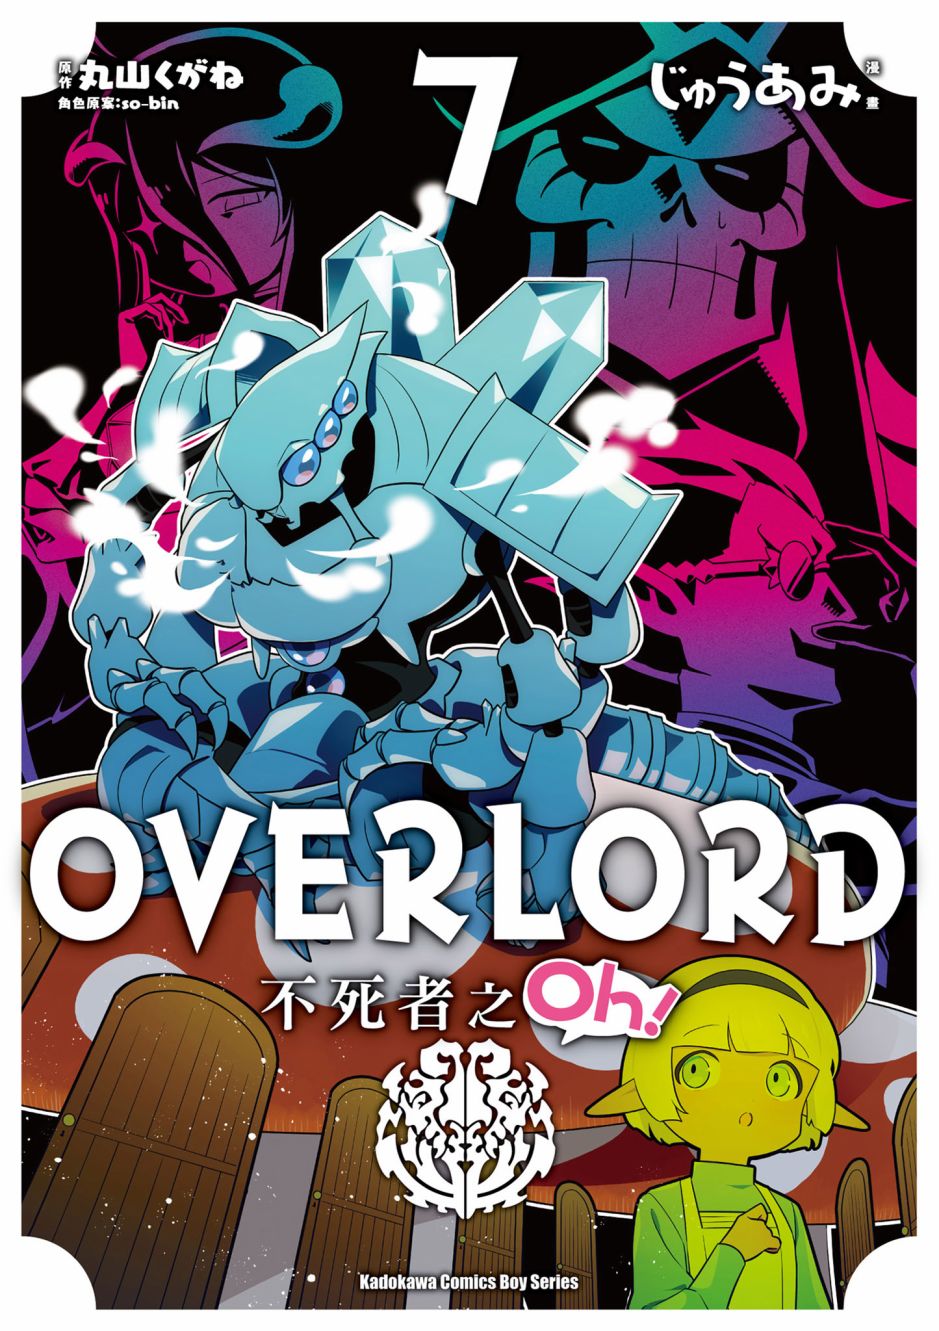 Overlord不死者之OH！ - 第07卷(1/3) - 1